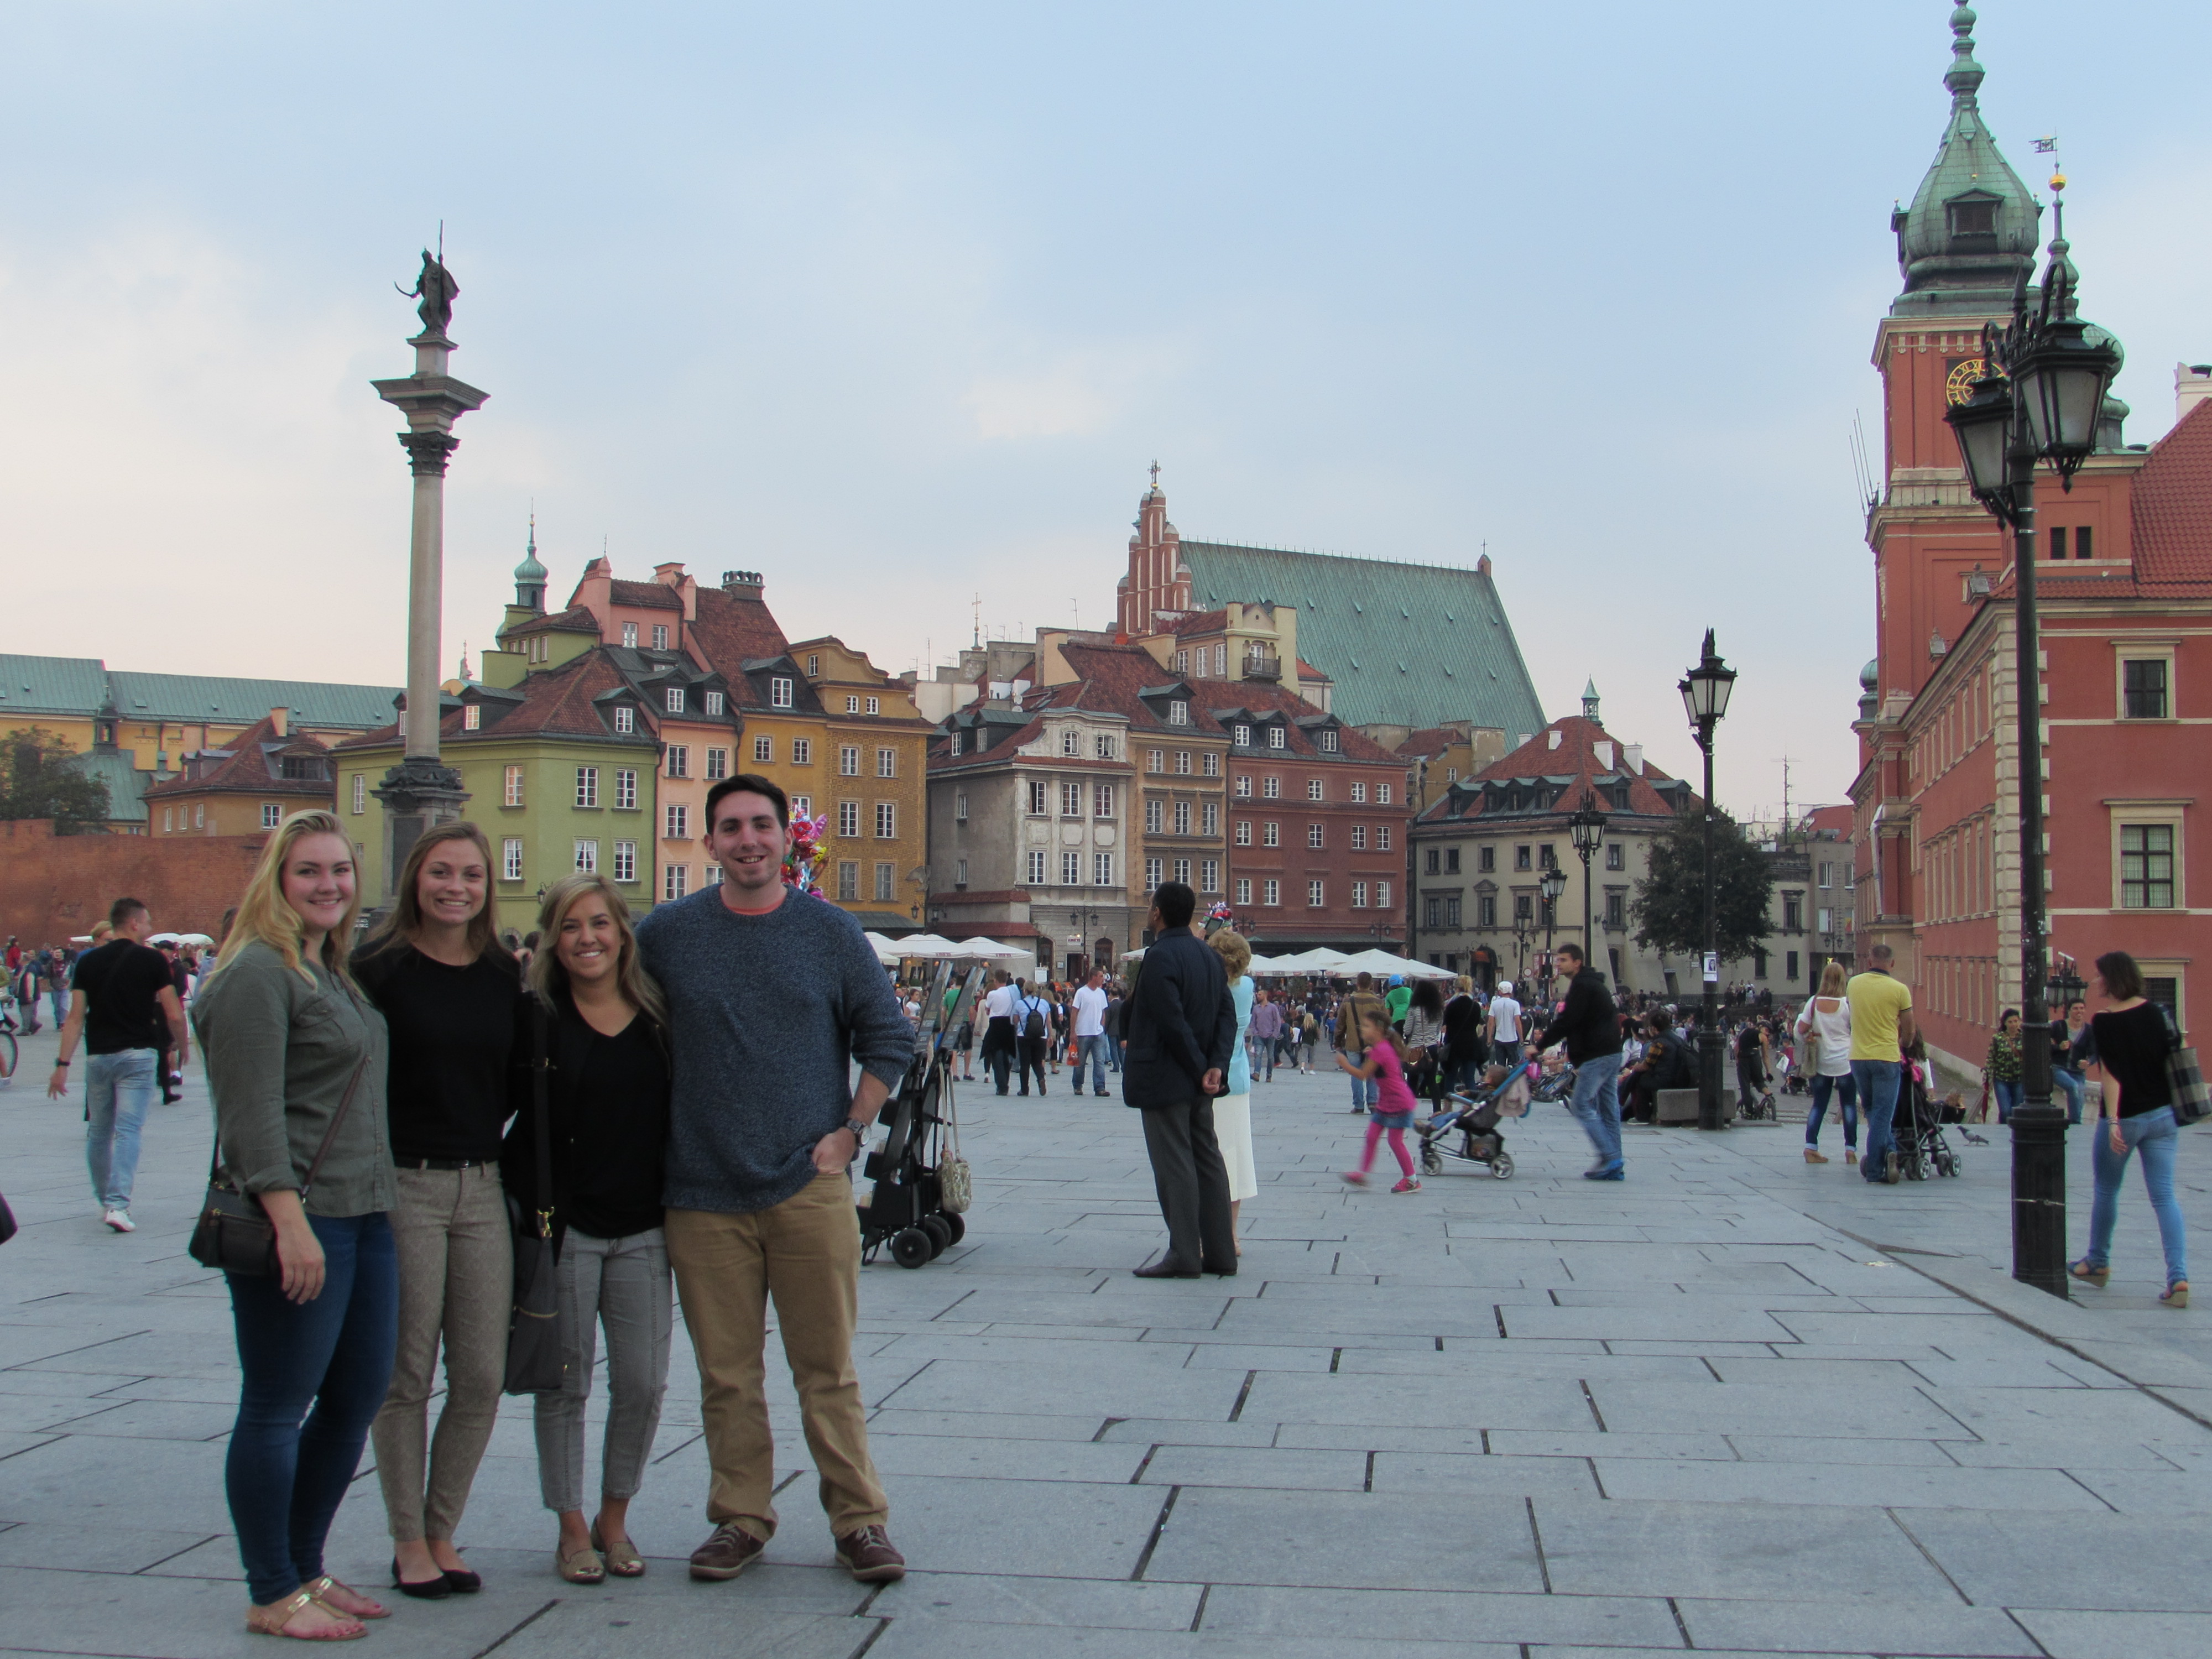 Students pose for a picture in Wroclaw